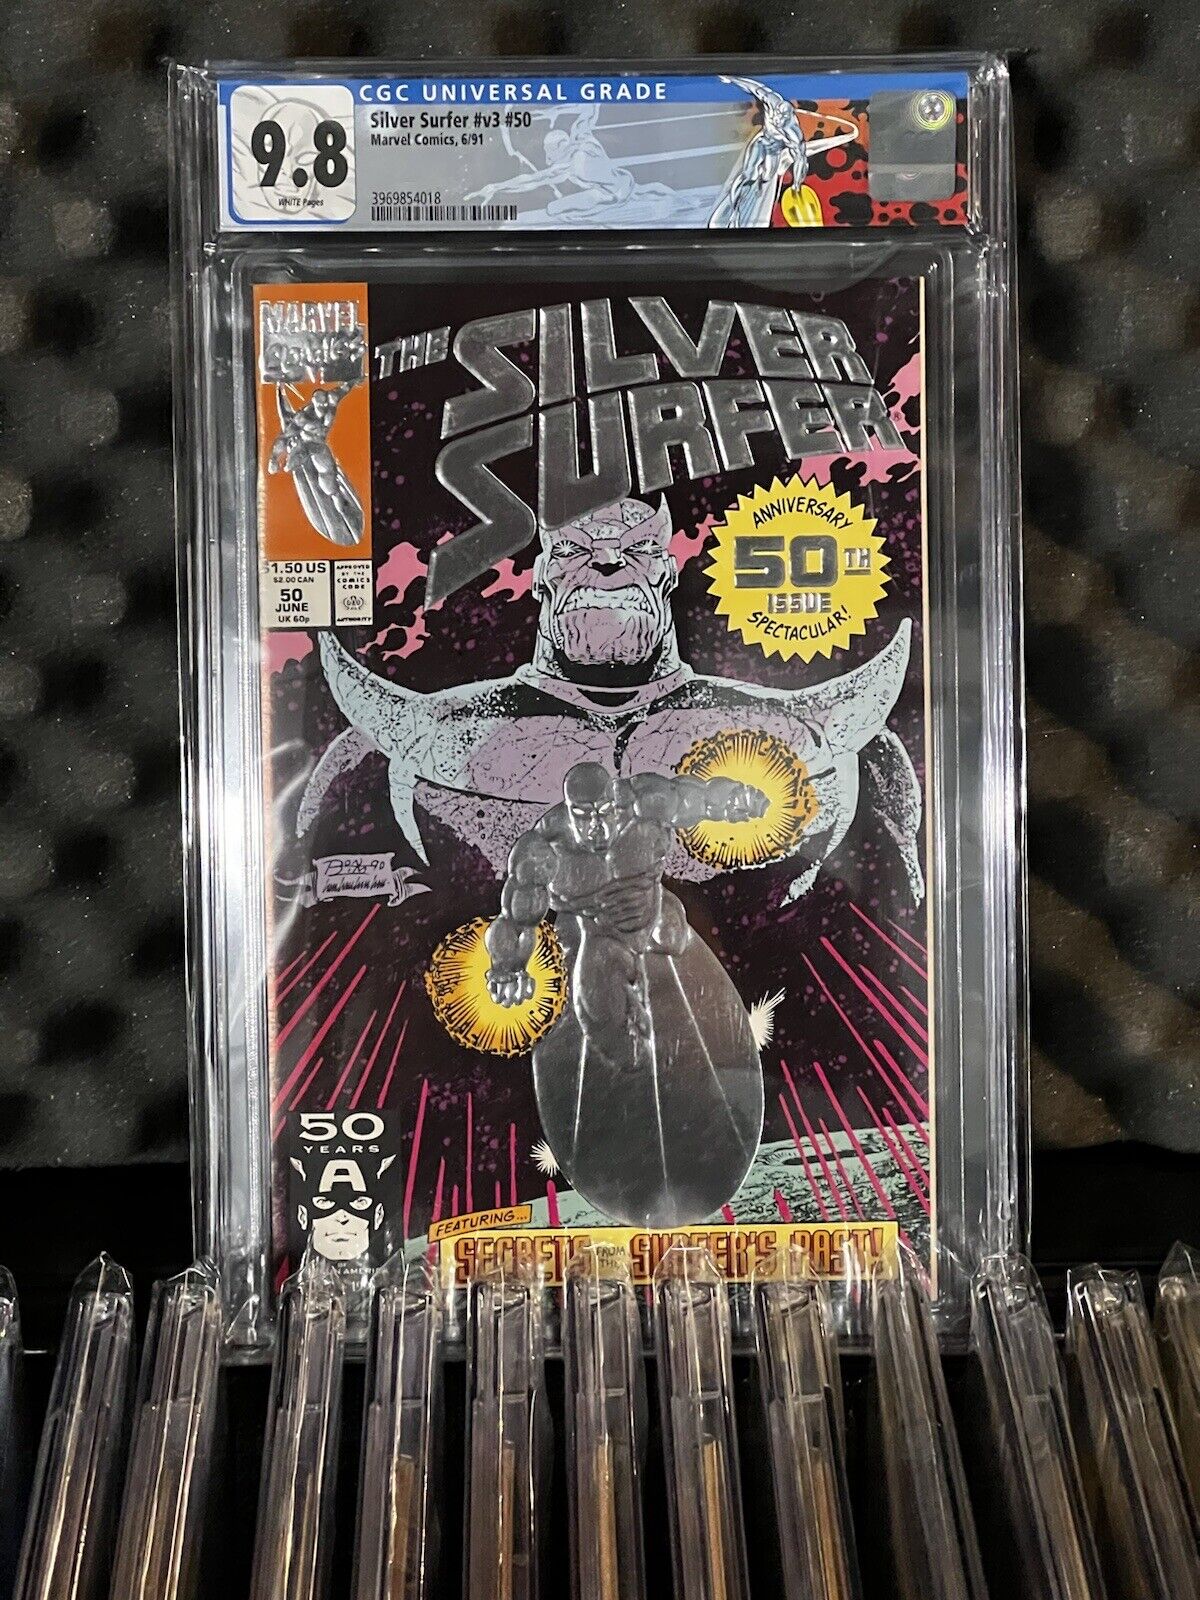 MARVEL COMICS SILVER SURFER #V3 #50 FIRST FOIL WHITE PAGES CGC 9.8 CUSTOM LABEL